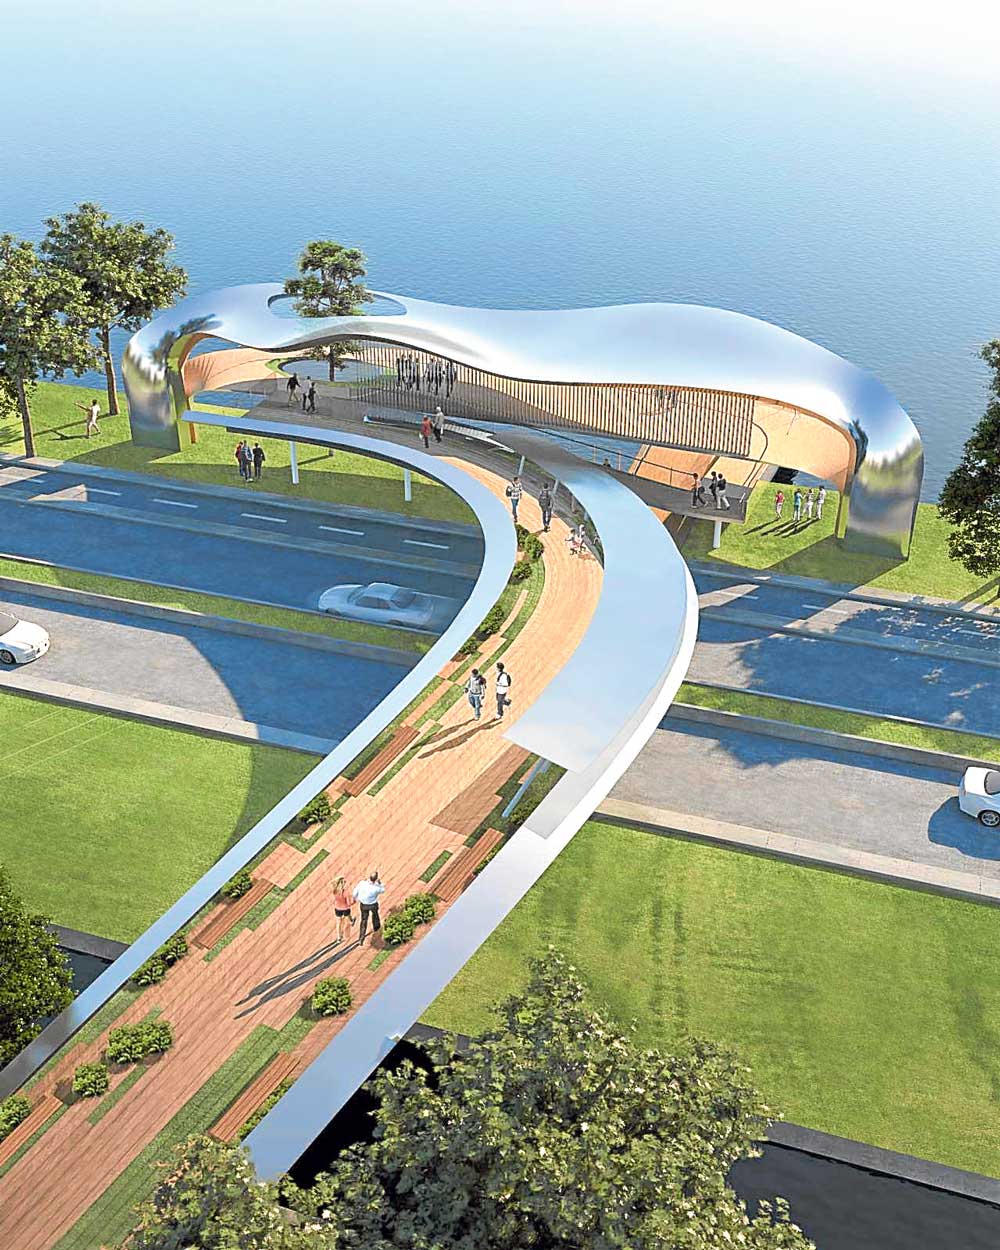 The Nest by WTA seeks to create a visual connection between road networks and pedestrian paths to encourage exploration of the surrounding scenery and vista and introduce a new perspective of Laguna de Bay.